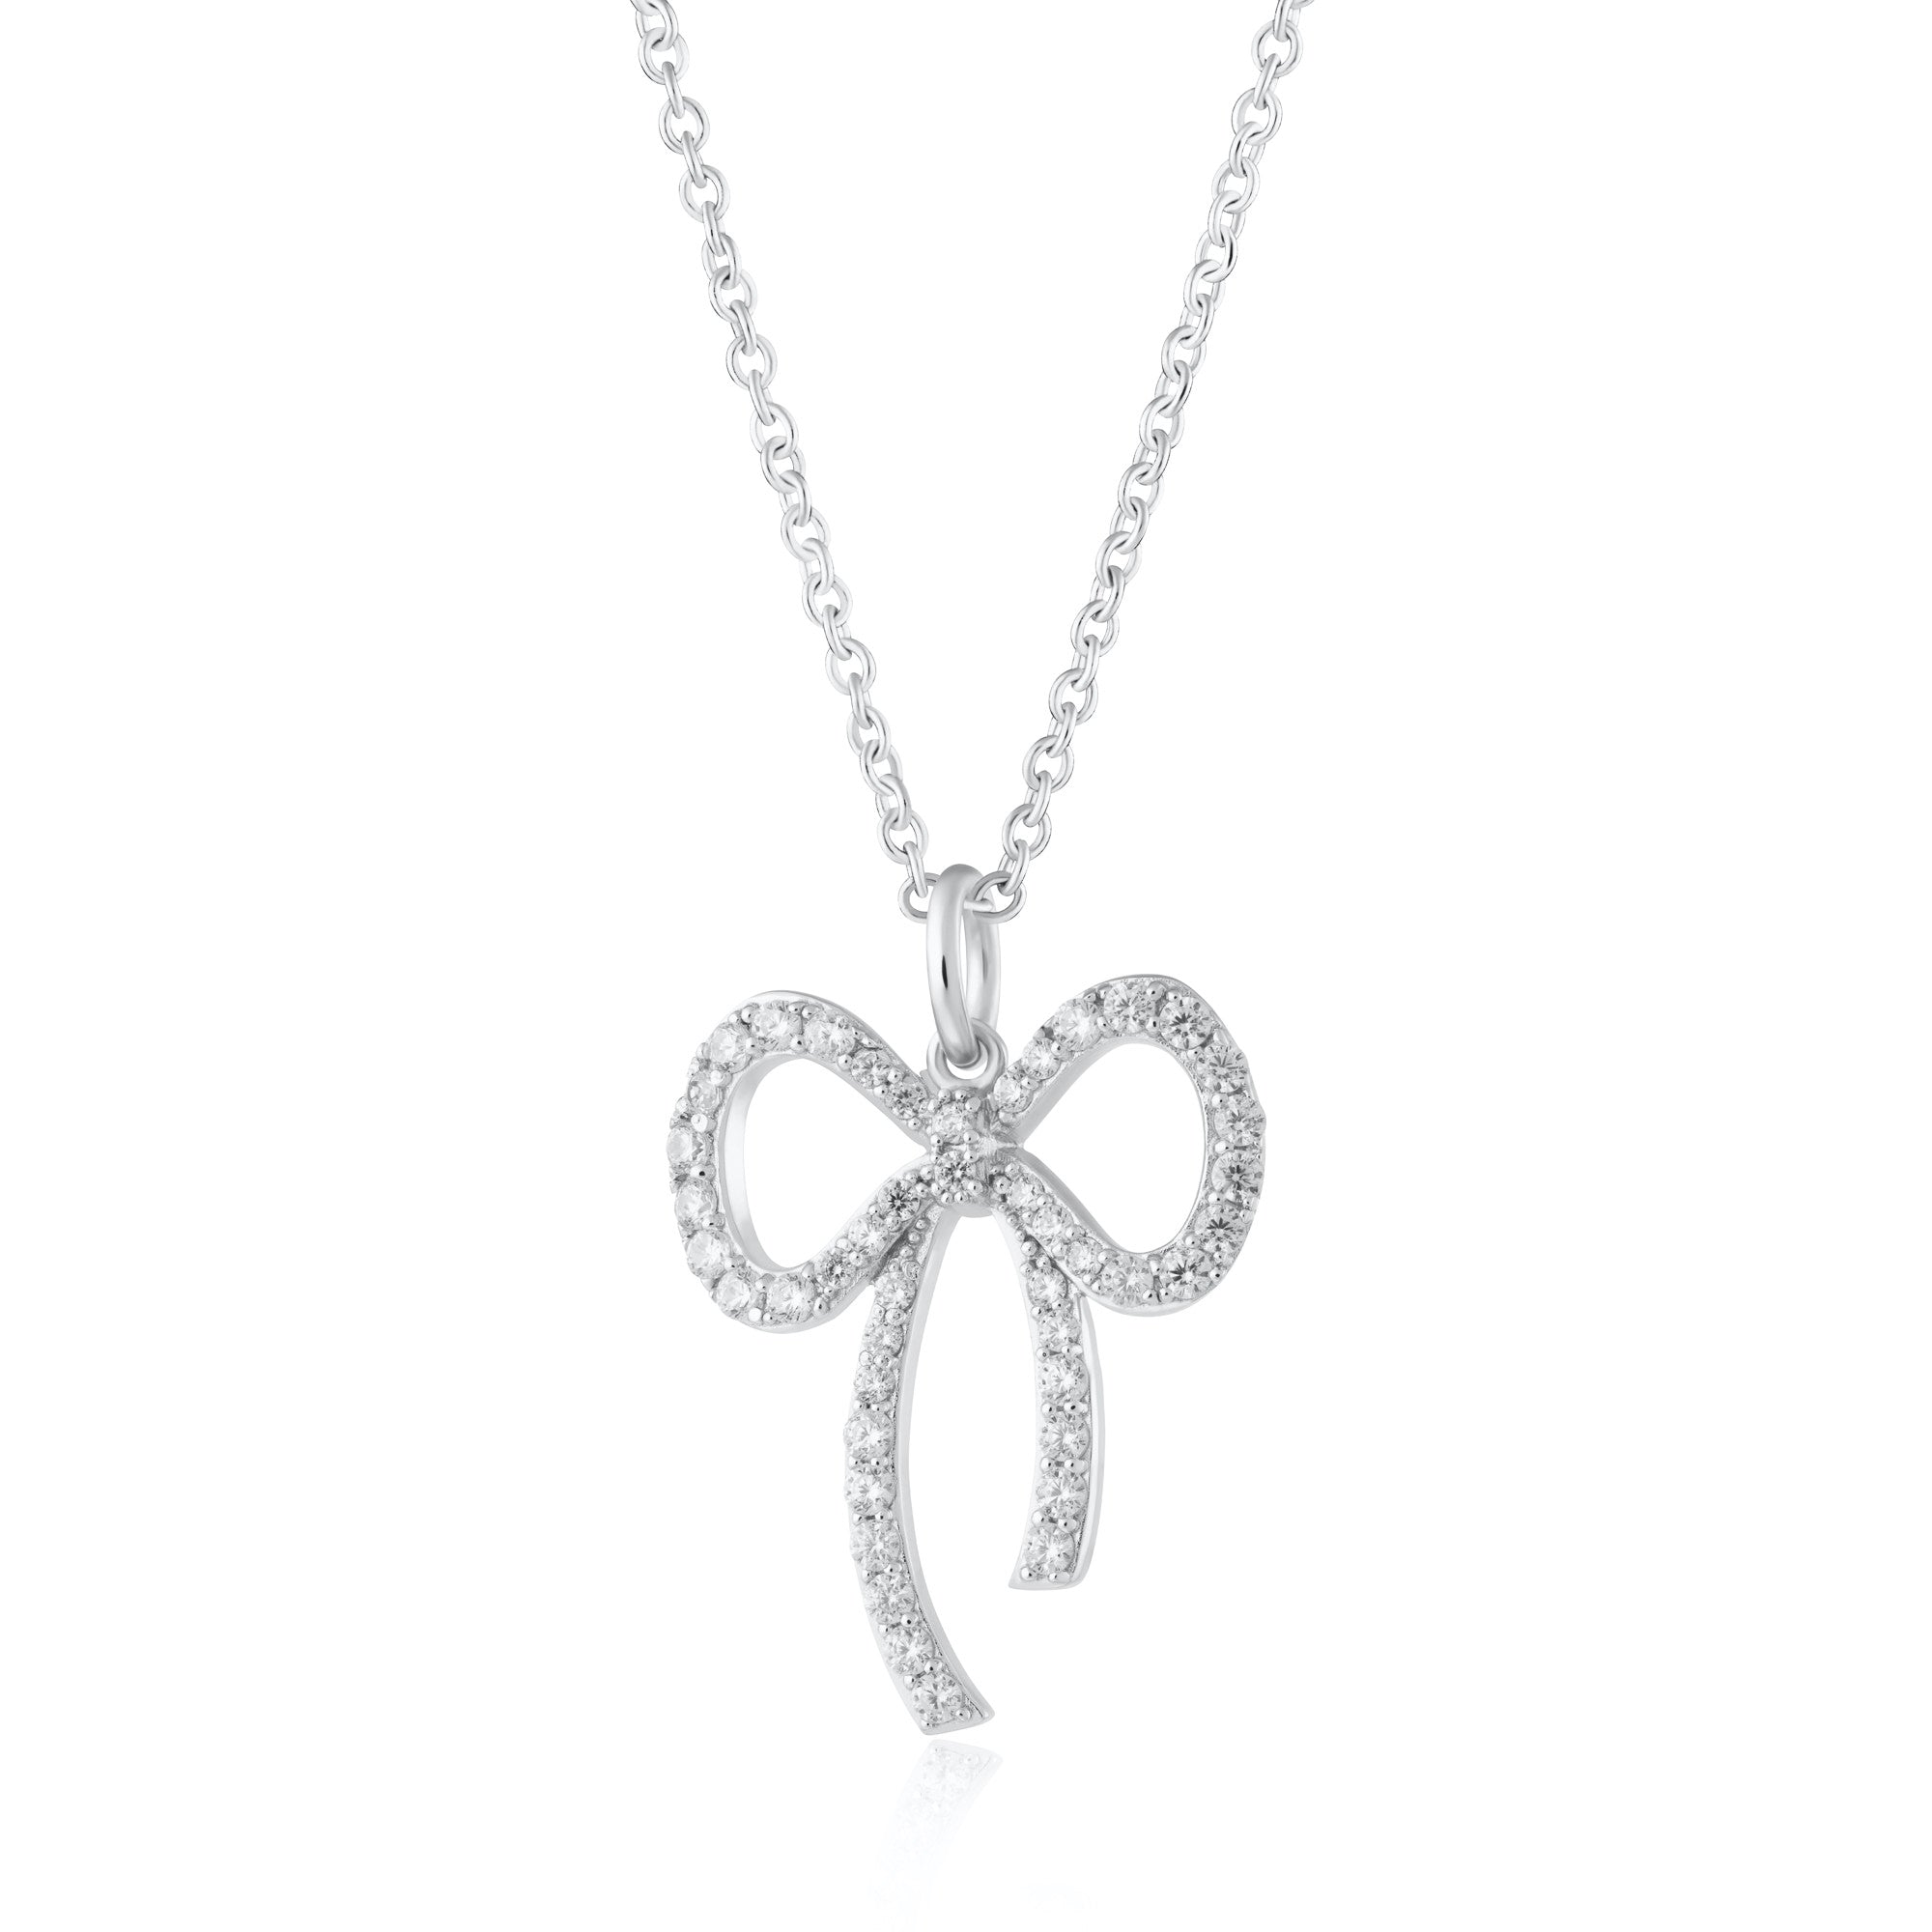 Bow Charm Necklace with Slider Clasp